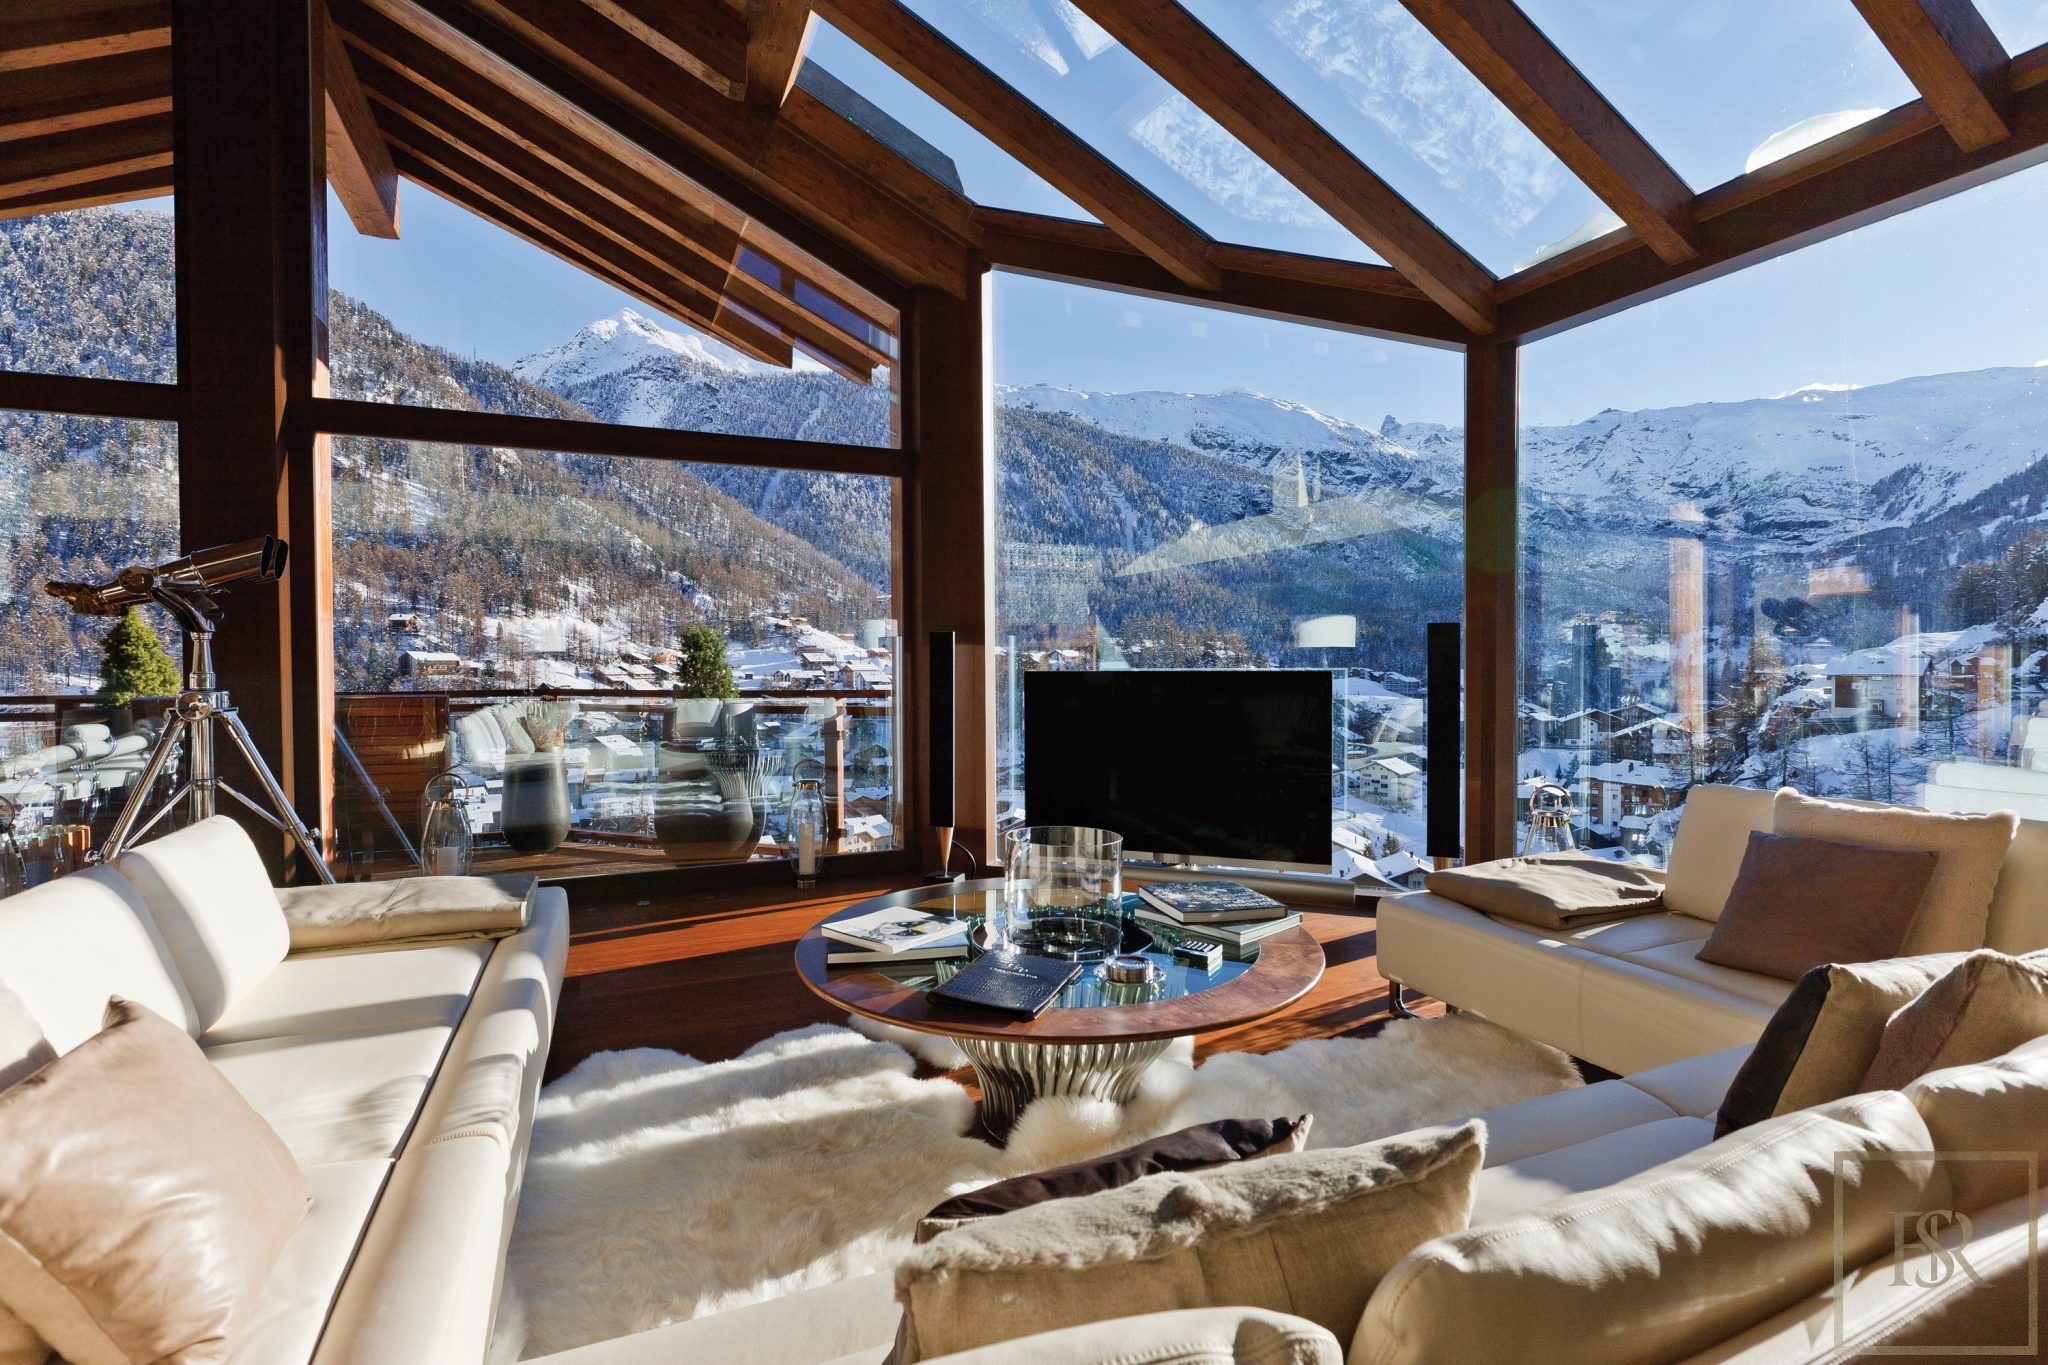 For super rich ultra luxury real estate properties homes, most expensive houses, rent unique penthouse apartment and ultimate villa in Zermatt Switzerland for rent holiday